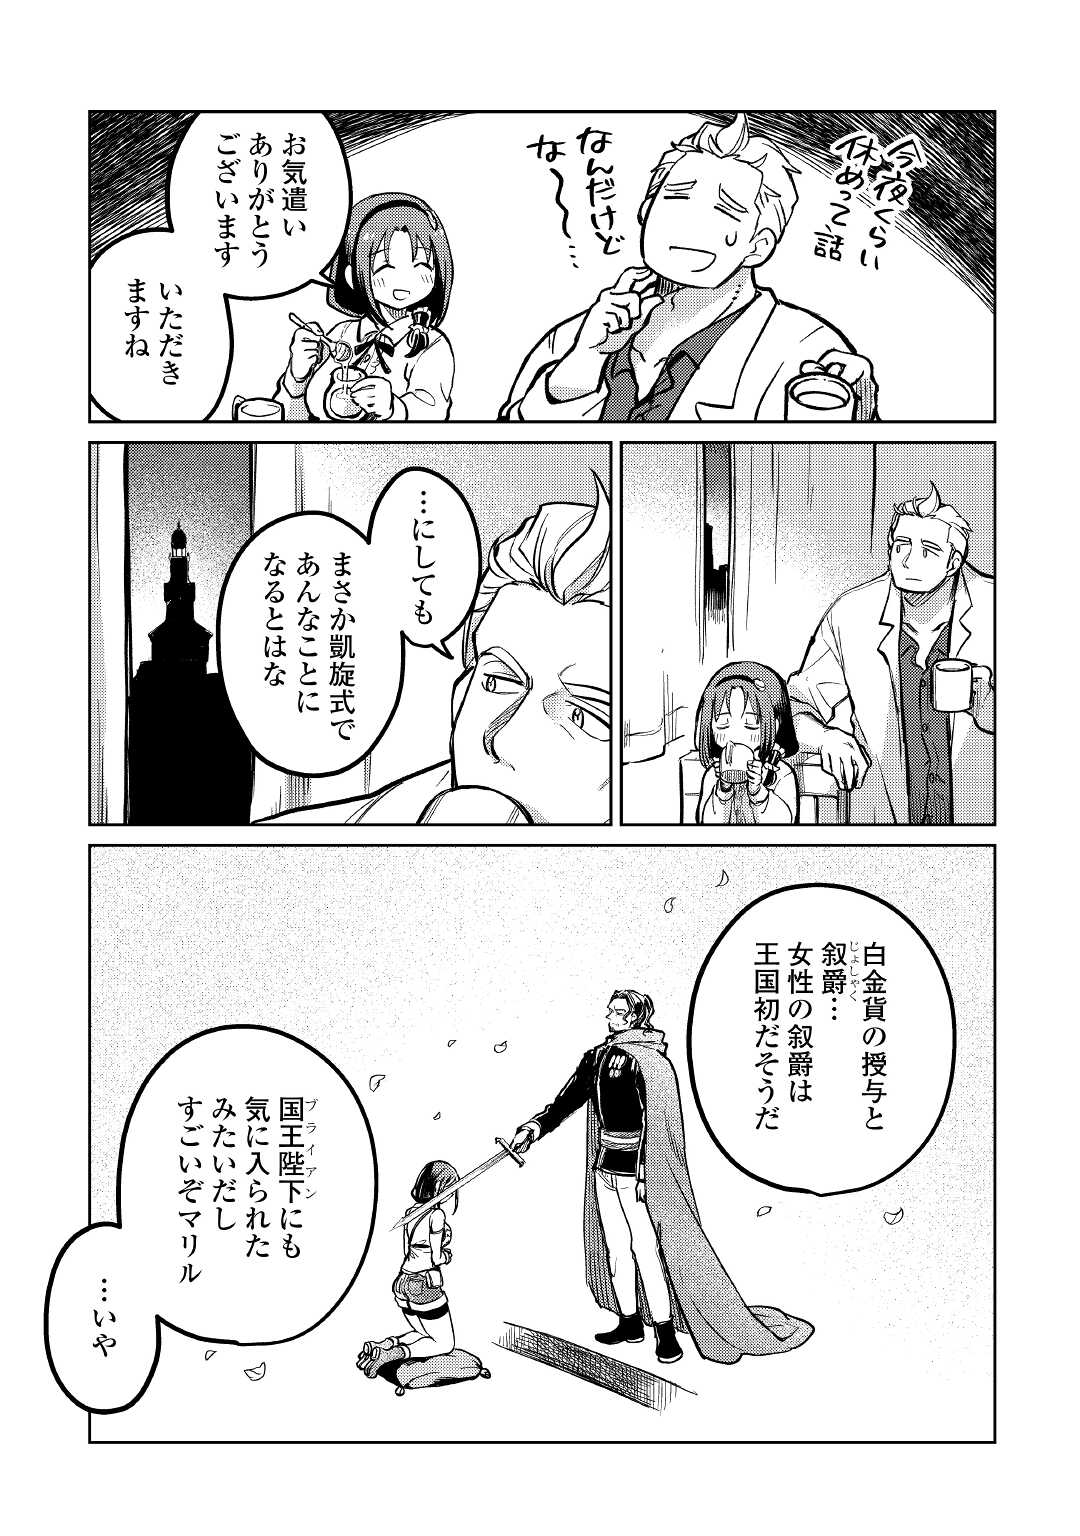 The Former Structural Researcher’s Story of Otherworldly Adventure 第37話 - Page 19